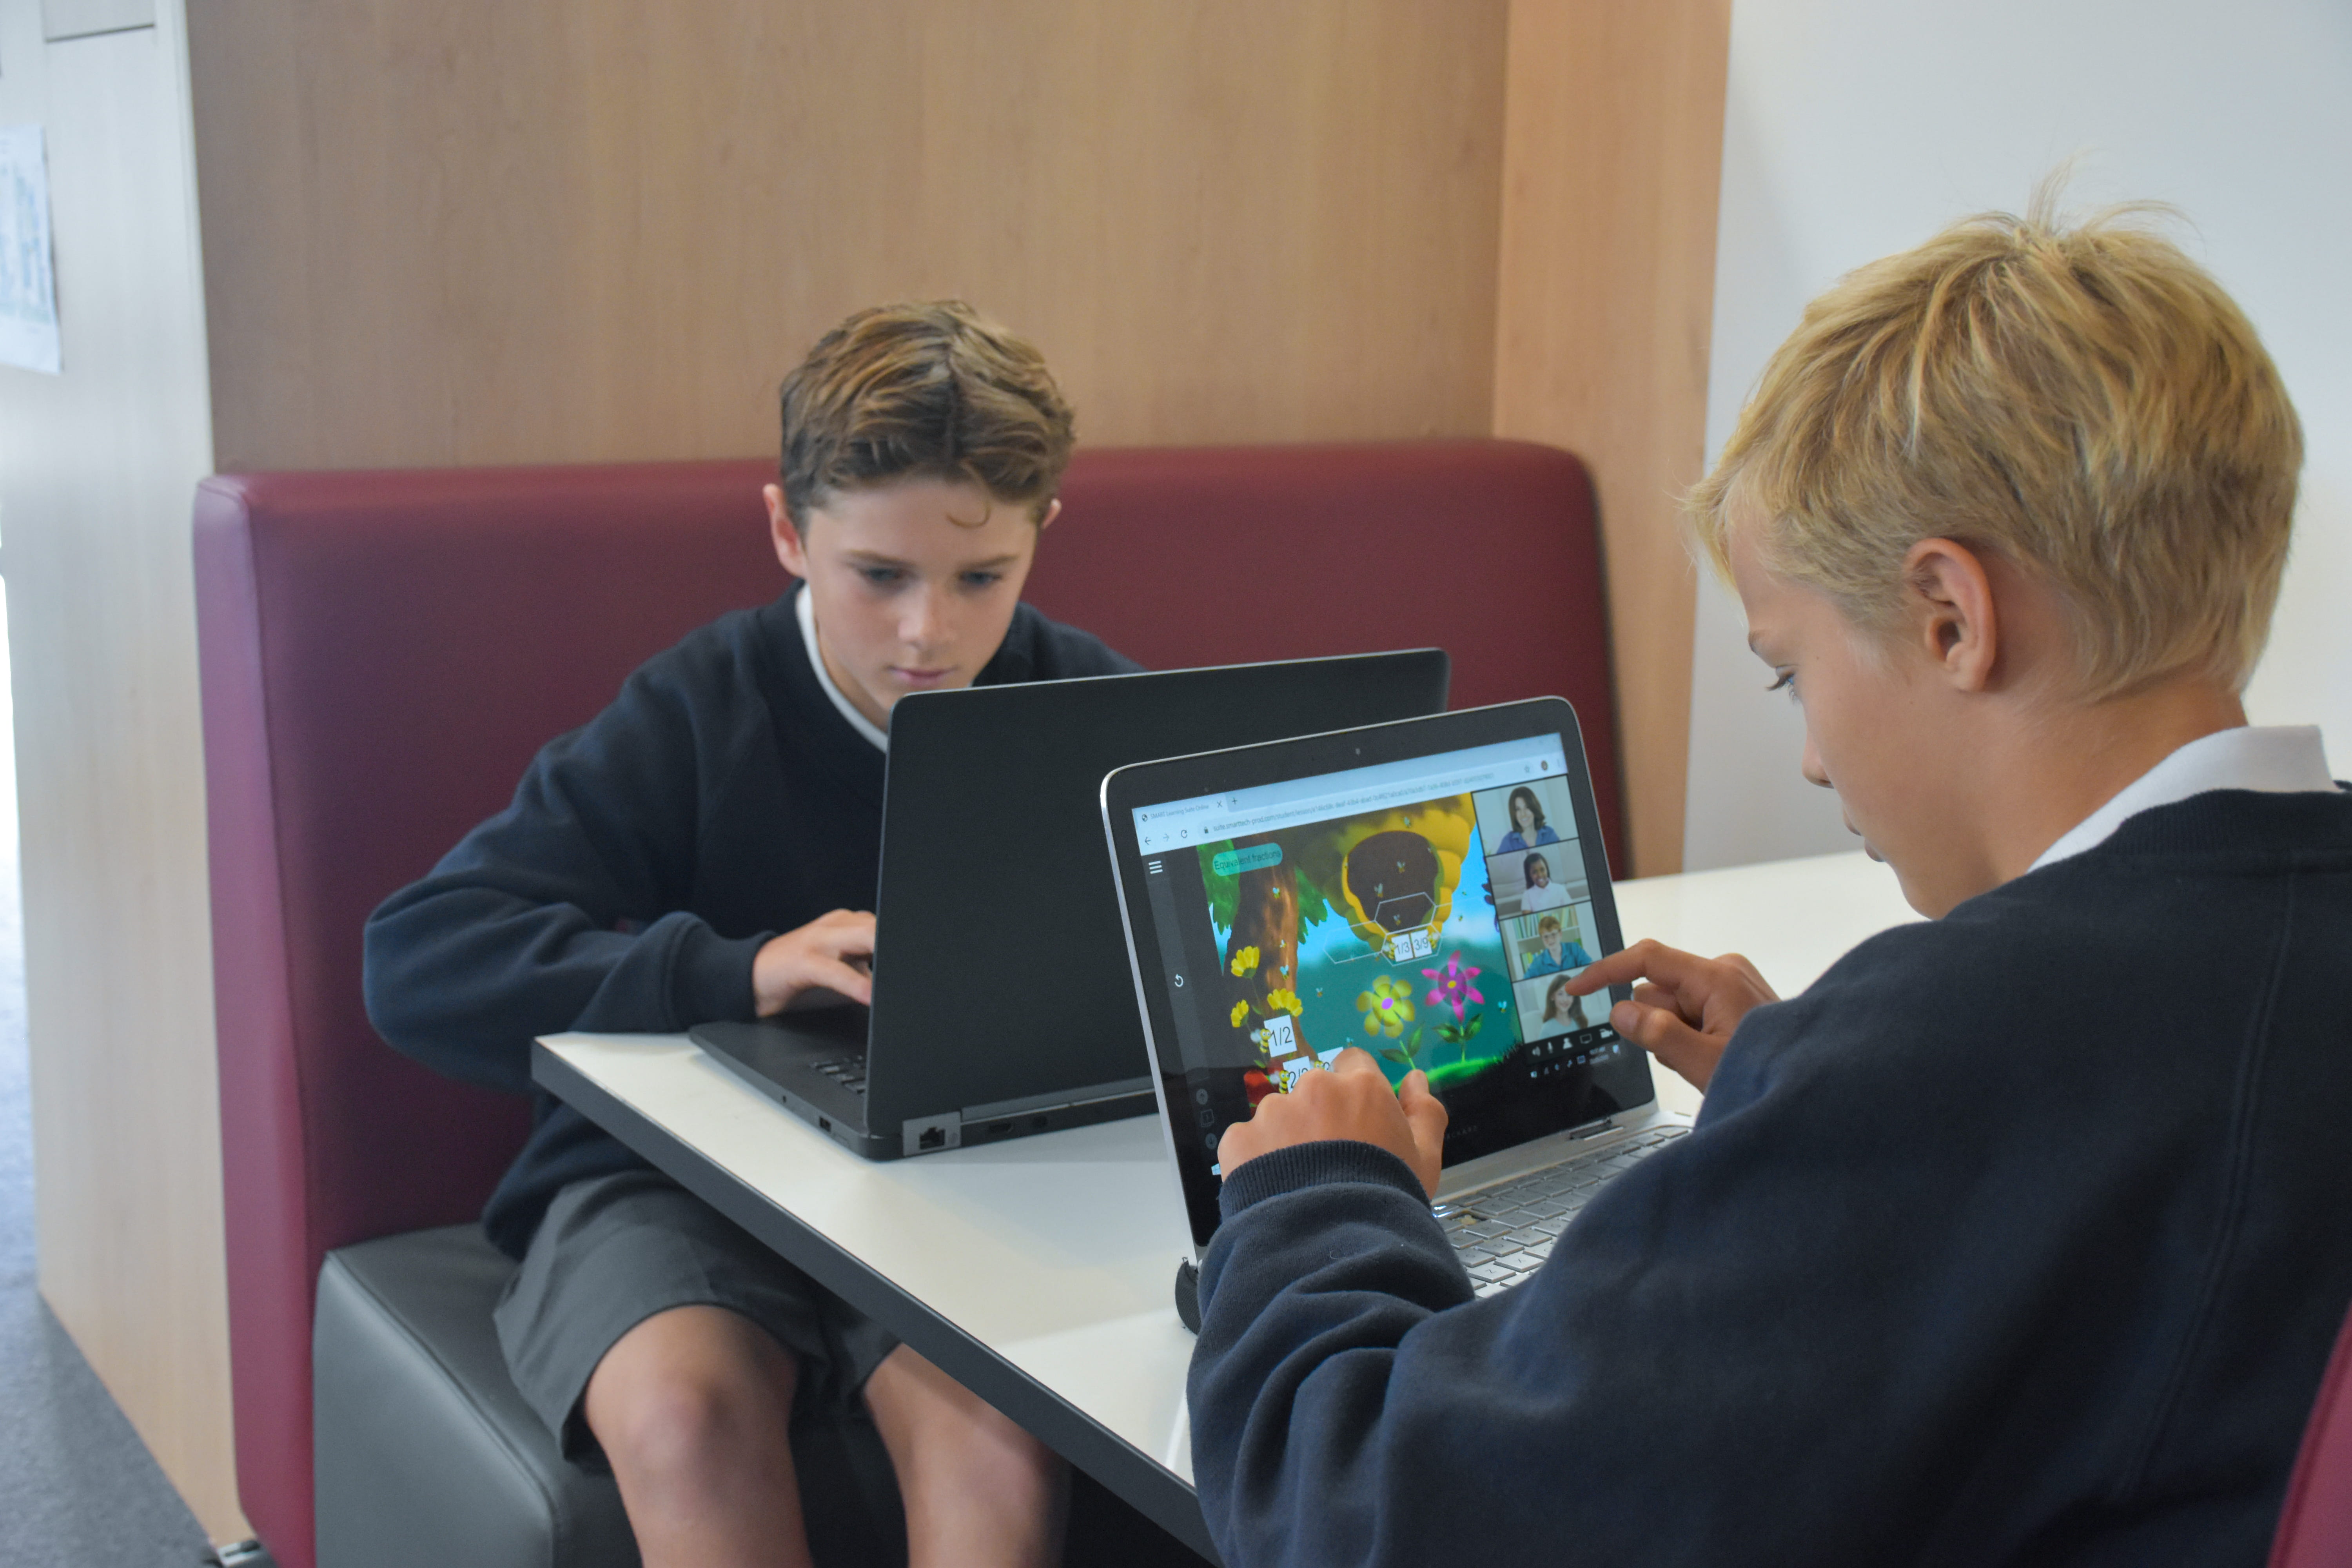 Two Australian male students complete a game-based activity on their student devices.